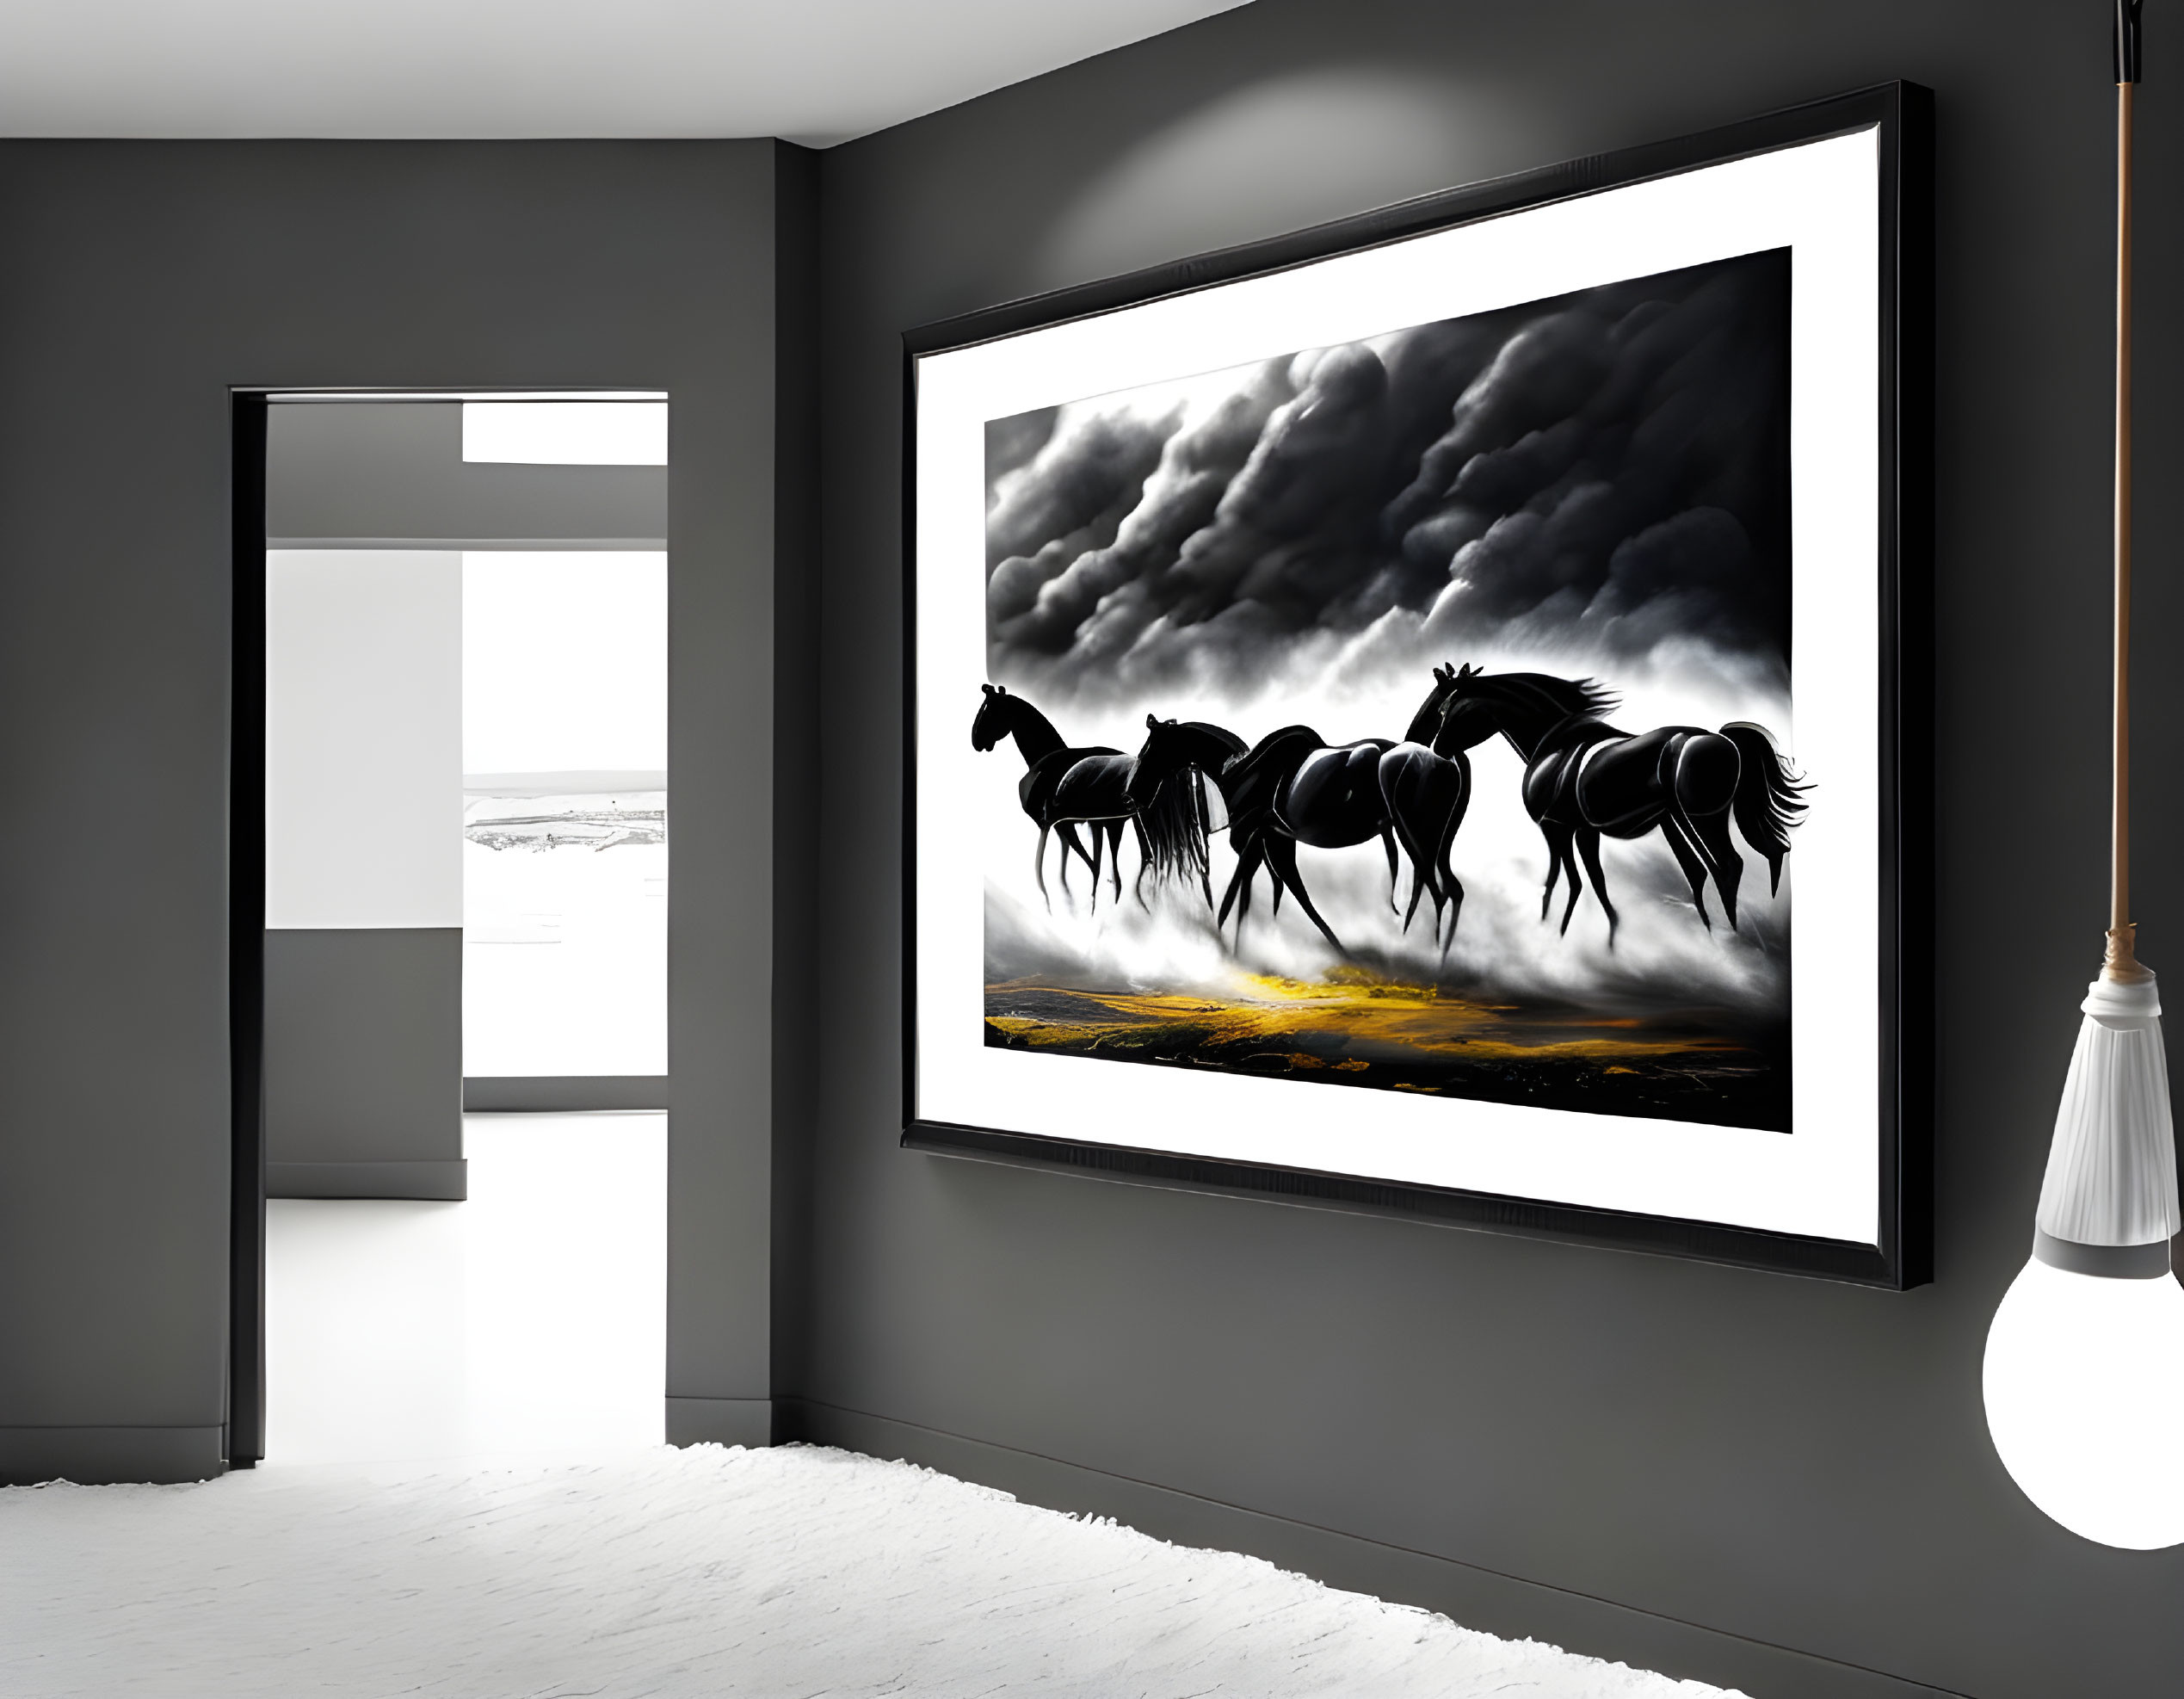 Gray-walled modern room with framed monochrome horse image, hanging lightbulb, and view of